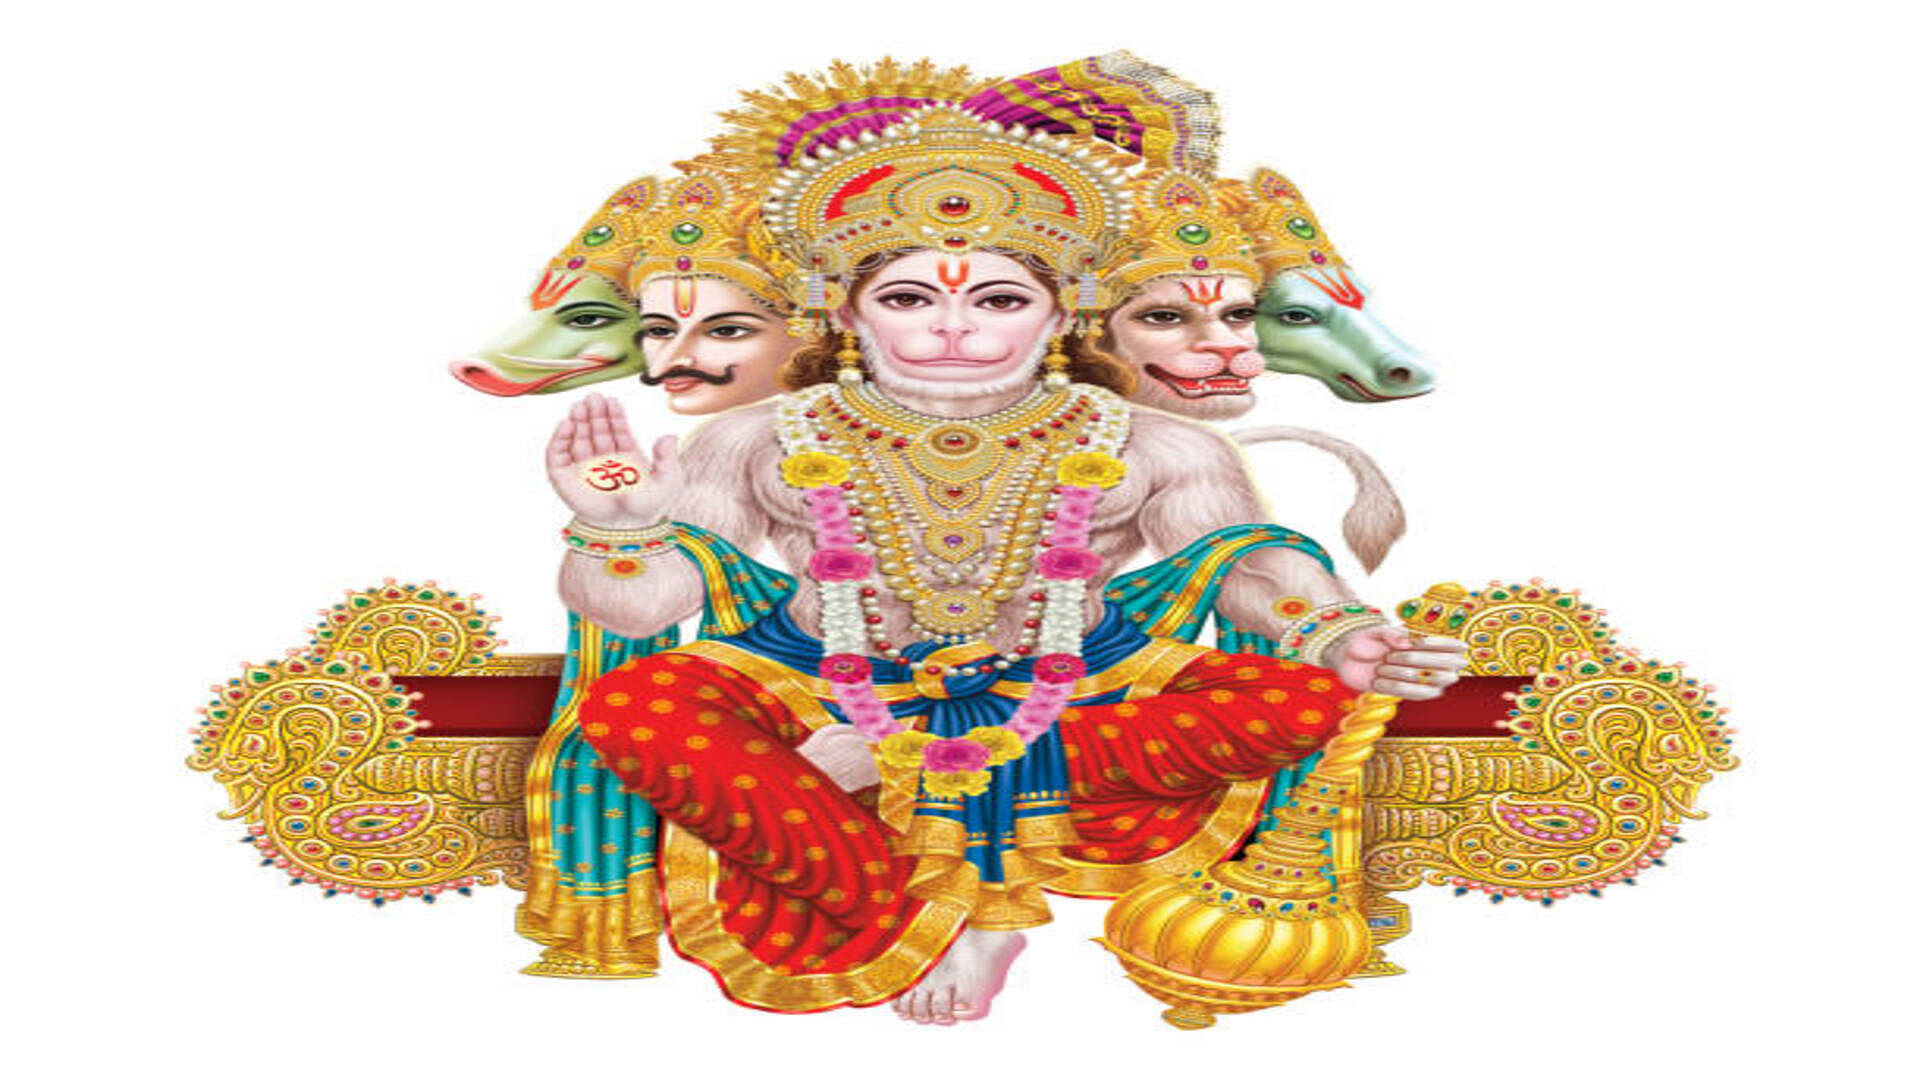 Browse High Resolution Stock Images Of Lord Hanuman Stock Photo - Download  Image Now - iStock